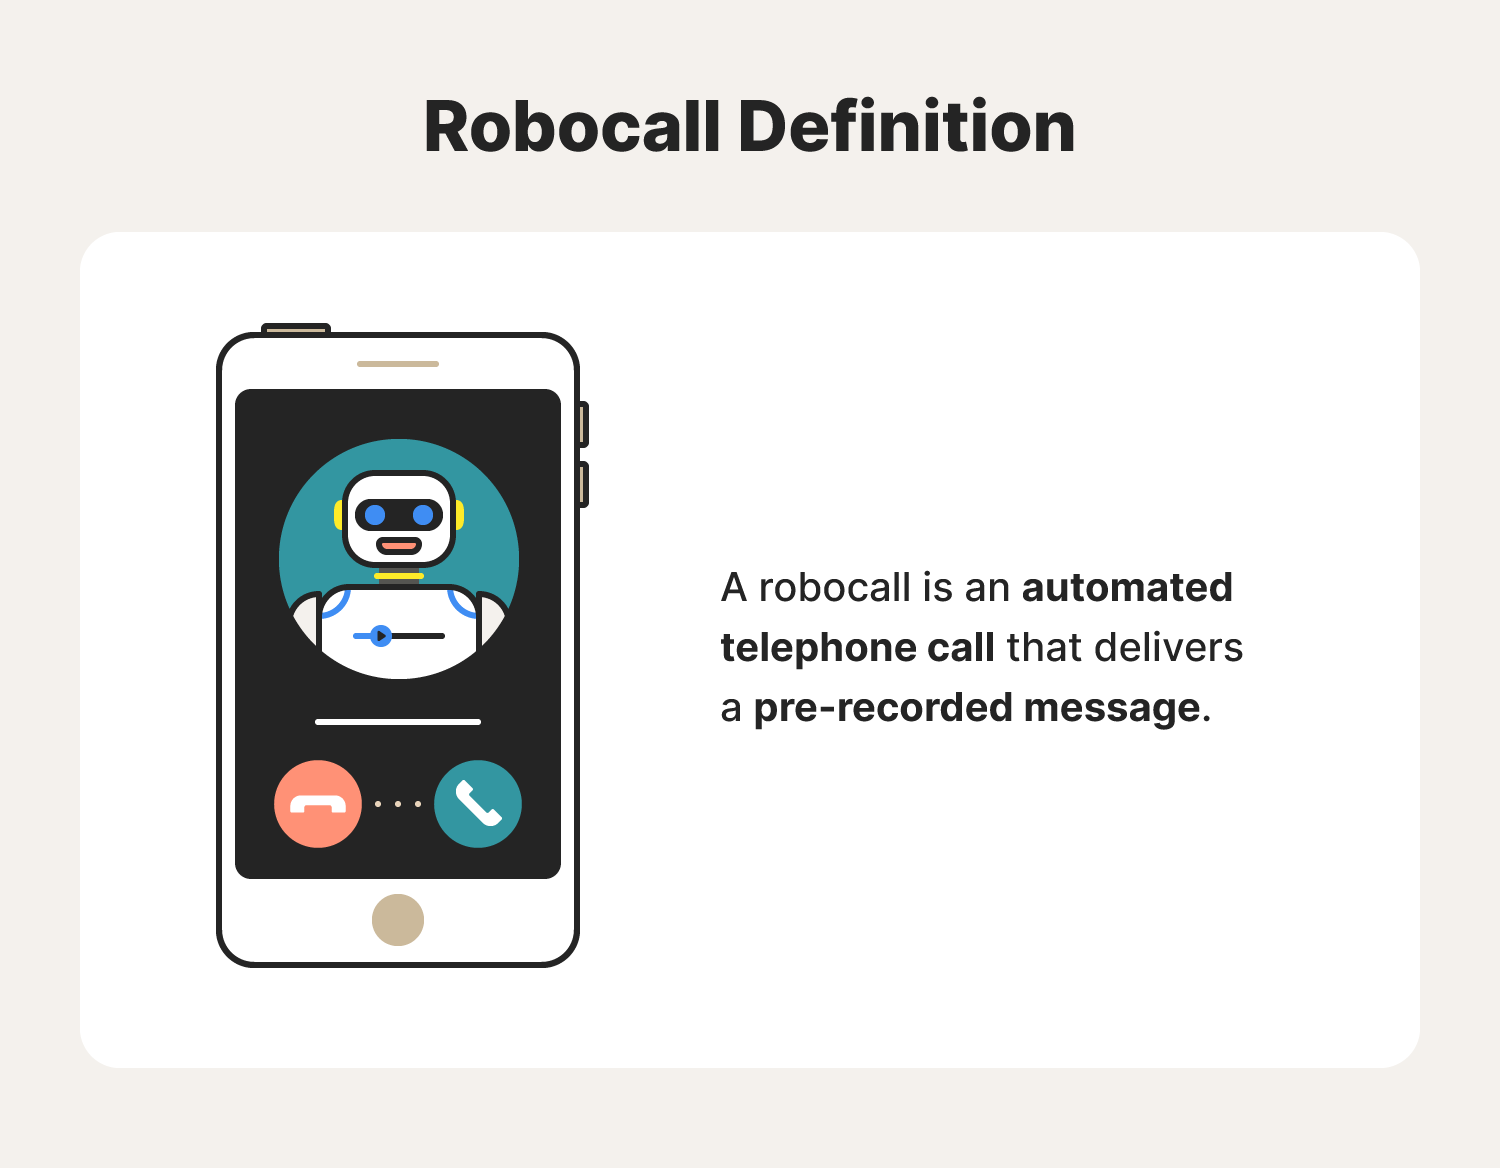 A graphic answers the question, “What is a robocall?”